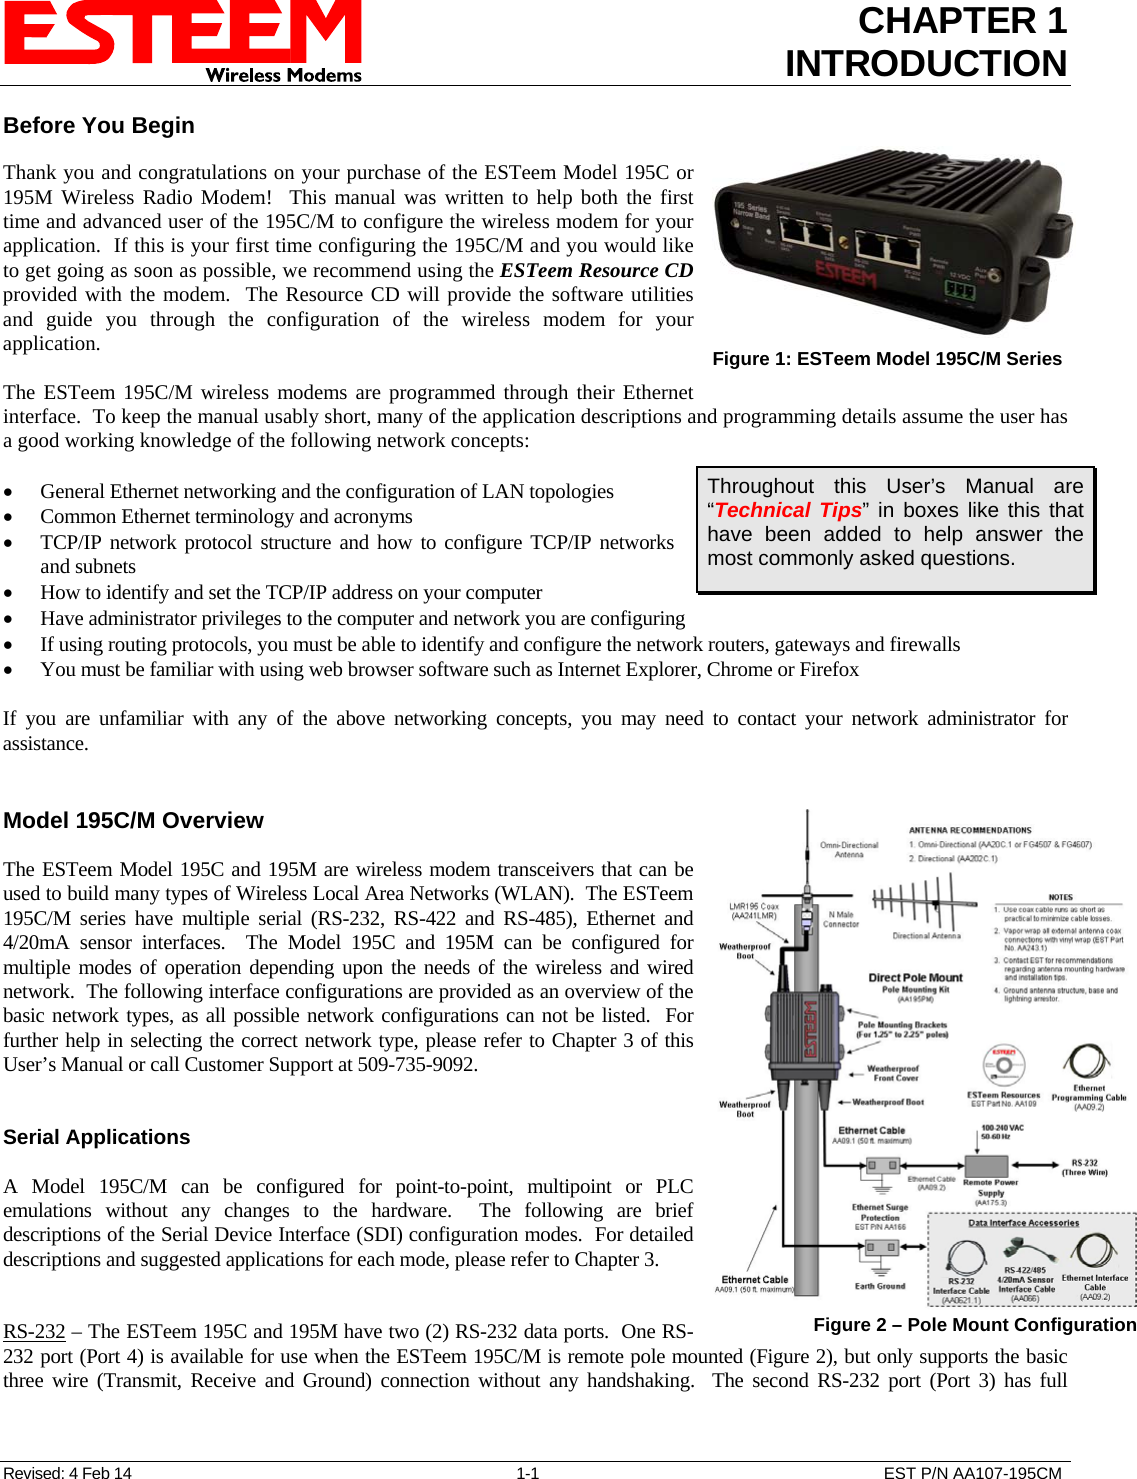 CHAPTER 1 INTRODUCTION  Before You Begin  Thank you and congratulations on your purchase of the ESTeem Model 195C or 195M Wireless Radio Modem!  This manual was written to help both the first time and advanced user of the 195C/M to configure the wireless modem for your application.  If this is your first time configuring the 195C/M and you would like to get going as soon as possible, we recommend using the ESTeem Resource CD provided with the modem.  The Resource CD will provide the software utilities and guide you through the configuration of the wireless modem for your application. Revised: 4 Feb 14  1-1  EST P/N AA107-195CM  The ESTeem 195C/M wireless modems are programmed through their Ethernet interface.  To keep the manual usably short, many of the application descriptions and programming details assume the user has a good working knowledge of the following network concepts:  Figure 1: ESTeem Model 195C/M Series    General Ethernet networking and the configuration of LAN topologies   Common Ethernet terminology and acronyms  TCP/IP network protocol structure and how to configure TCP/IP networks and subnets Throughout this User’s Manual are “Technical Tips” in boxes like this that have been added to help answer the most commonly asked questions.  How to identify and set the TCP/IP address on your computer  Have administrator privileges to the computer and network you are configuring  If using routing protocols, you must be able to identify and configure the network routers, gateways and firewalls  You must be familiar with using web browser software such as Internet Explorer, Chrome or Firefox  If you are unfamiliar with any of the above networking concepts, you may need to contact your network administrator for assistance.   Model 195C/M Overview  The ESTeem Model 195C and 195M are wireless modem transceivers that can be used to build many types of Wireless Local Area Networks (WLAN).  The ESTeem 195C/M series have multiple serial (RS-232, RS-422 and RS-485), Ethernet and 4/20mA sensor interfaces.  The Model 195C and 195M can be configured for multiple modes of operation depending upon the needs of the wireless and wired network.  The following interface configurations are provided as an overview of the basic network types, as all possible network configurations can not be listed.  For further help in selecting the correct network type, please refer to Chapter 3 of this User’s Manual or call Customer Support at 509-735-9092.    Serial Applications  A Model 195C/M can be configured for point-to-point, multipoint or PLC emulations without any changes to the hardware.  The following are brief descriptions of the Serial Device Interface (SDI) configuration modes.  For detailed descriptions and suggested applications for each mode, please refer to Chapter 3.   RS-232 – The ESTeem 195C and 195M have two (2) RS-232 data ports.  One RS-232 port (Port 4) is available for use when the ESTeem 195C/M is remote pole mounted (Figure 2), but only supports the basic three wire (Transmit, Receive and Ground) connection without any handshaking.  The second RS-232 port (Port 3) has full  Figure 2 – Pole Mount Configuration 